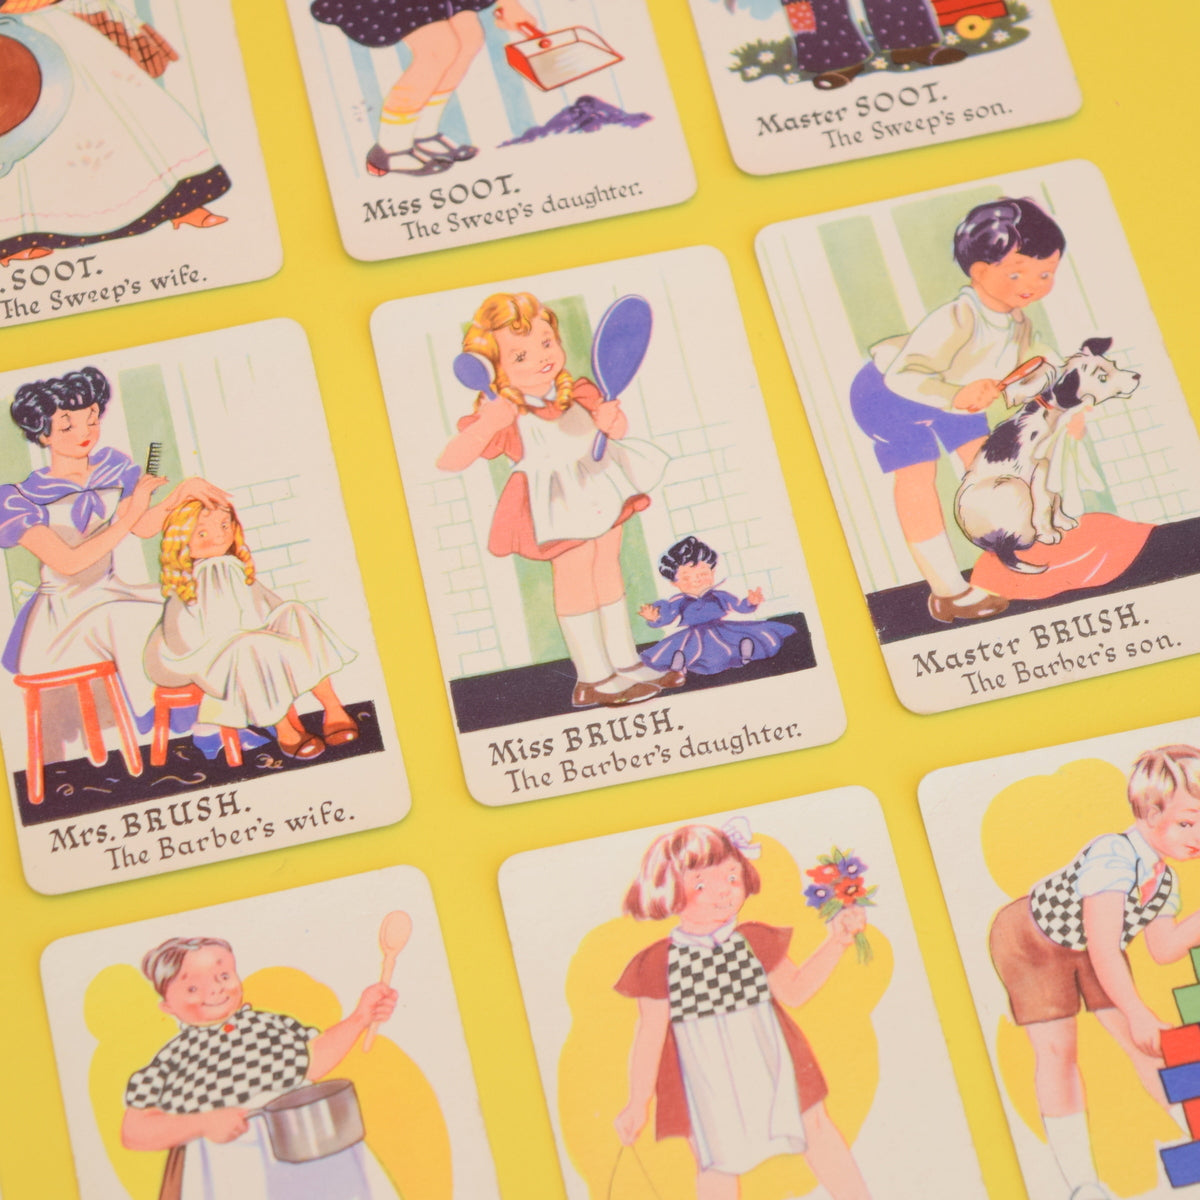 Vintage 1950s Happy Families Card Game - Fantastic Images - Ideal For Framing